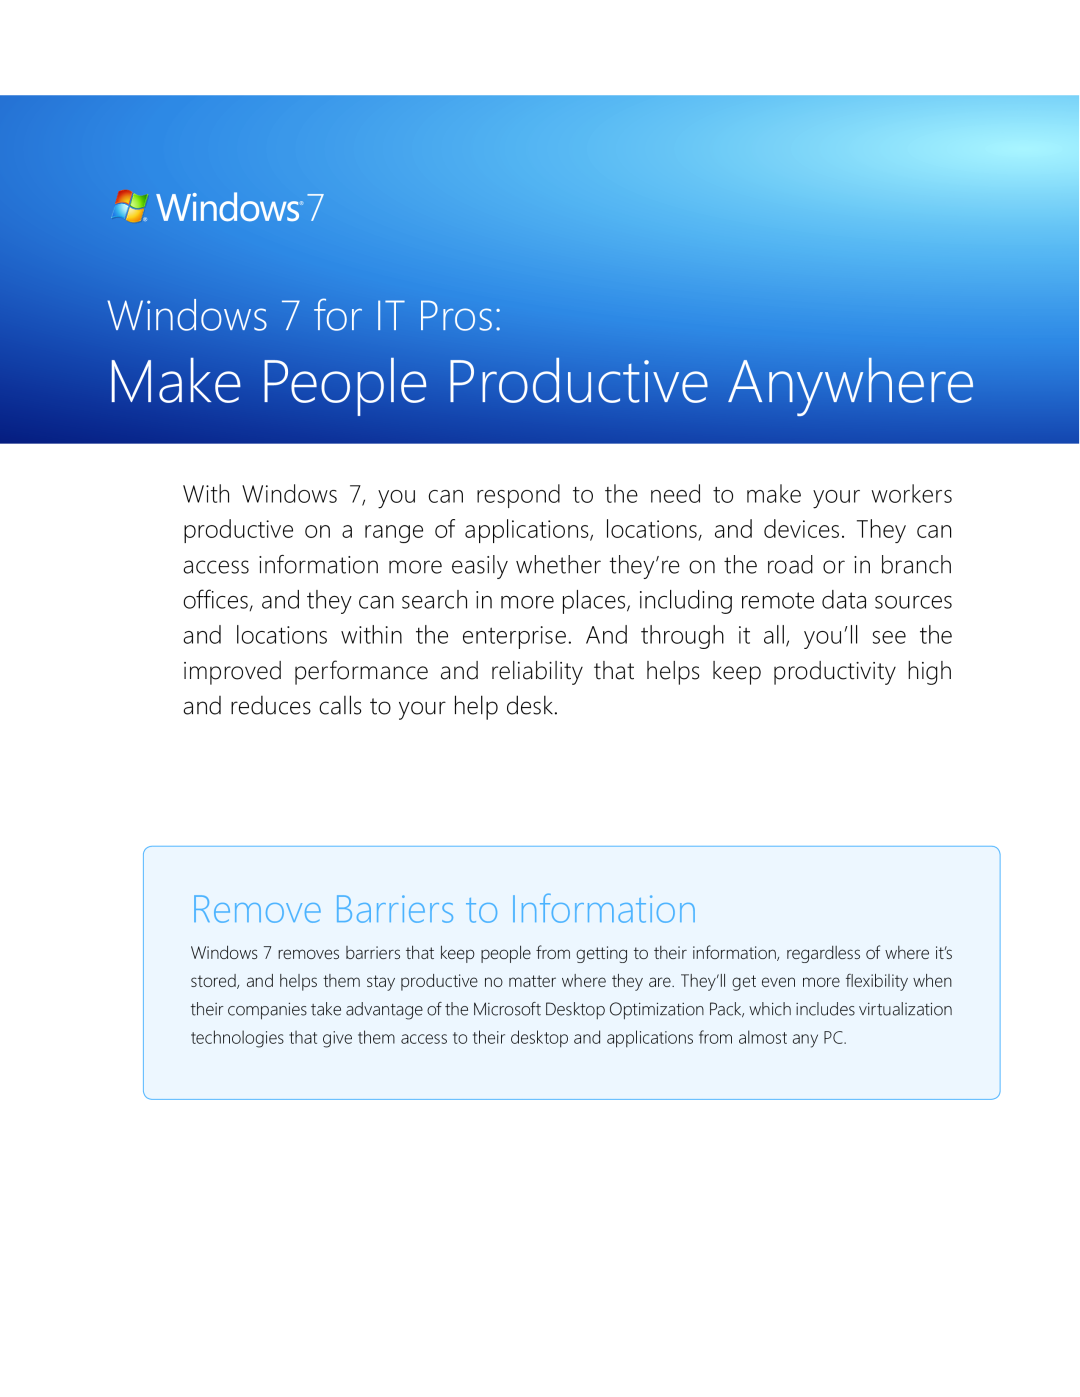 Microsoft FQC04617, GLC00182 manual Make People Productive Anywhere, Windows 7 for IT Pros, Remove Barriers to Information 